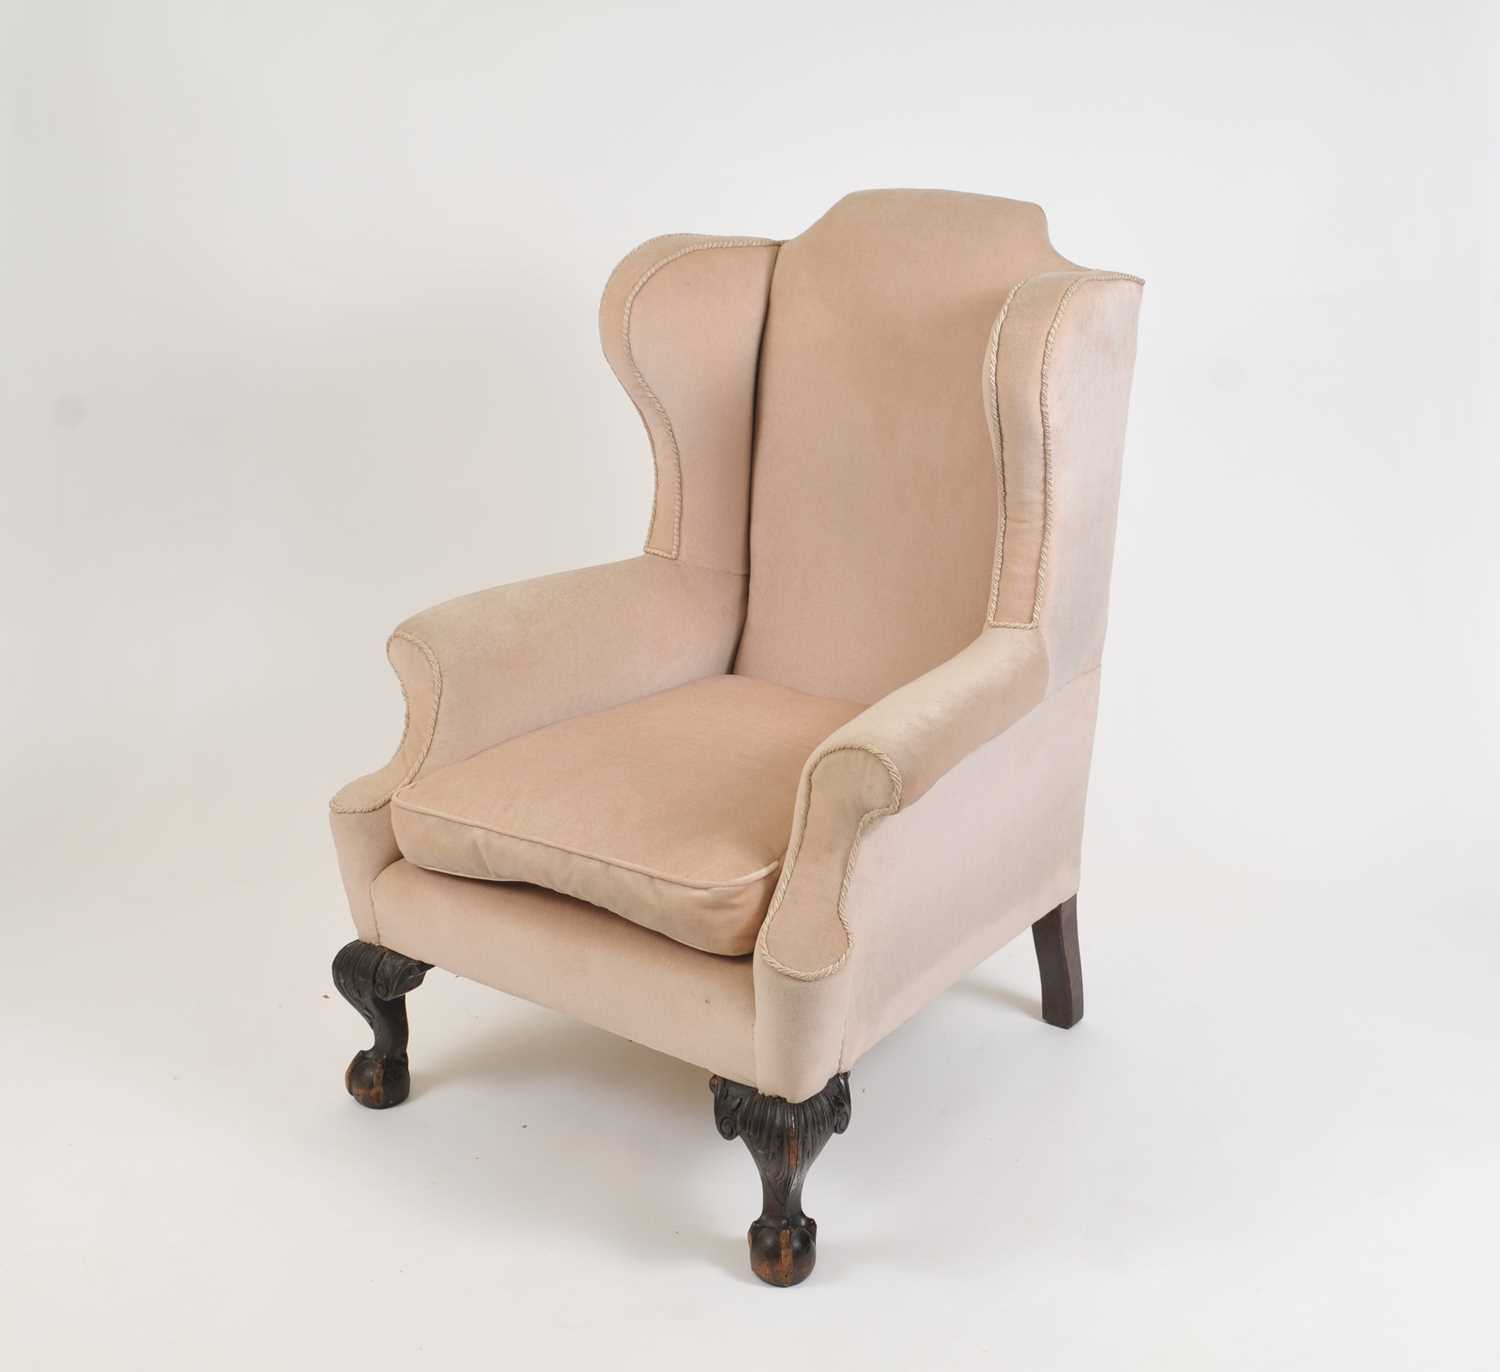 A large and heavy Queen Ann style upholstered wing-back arm chair